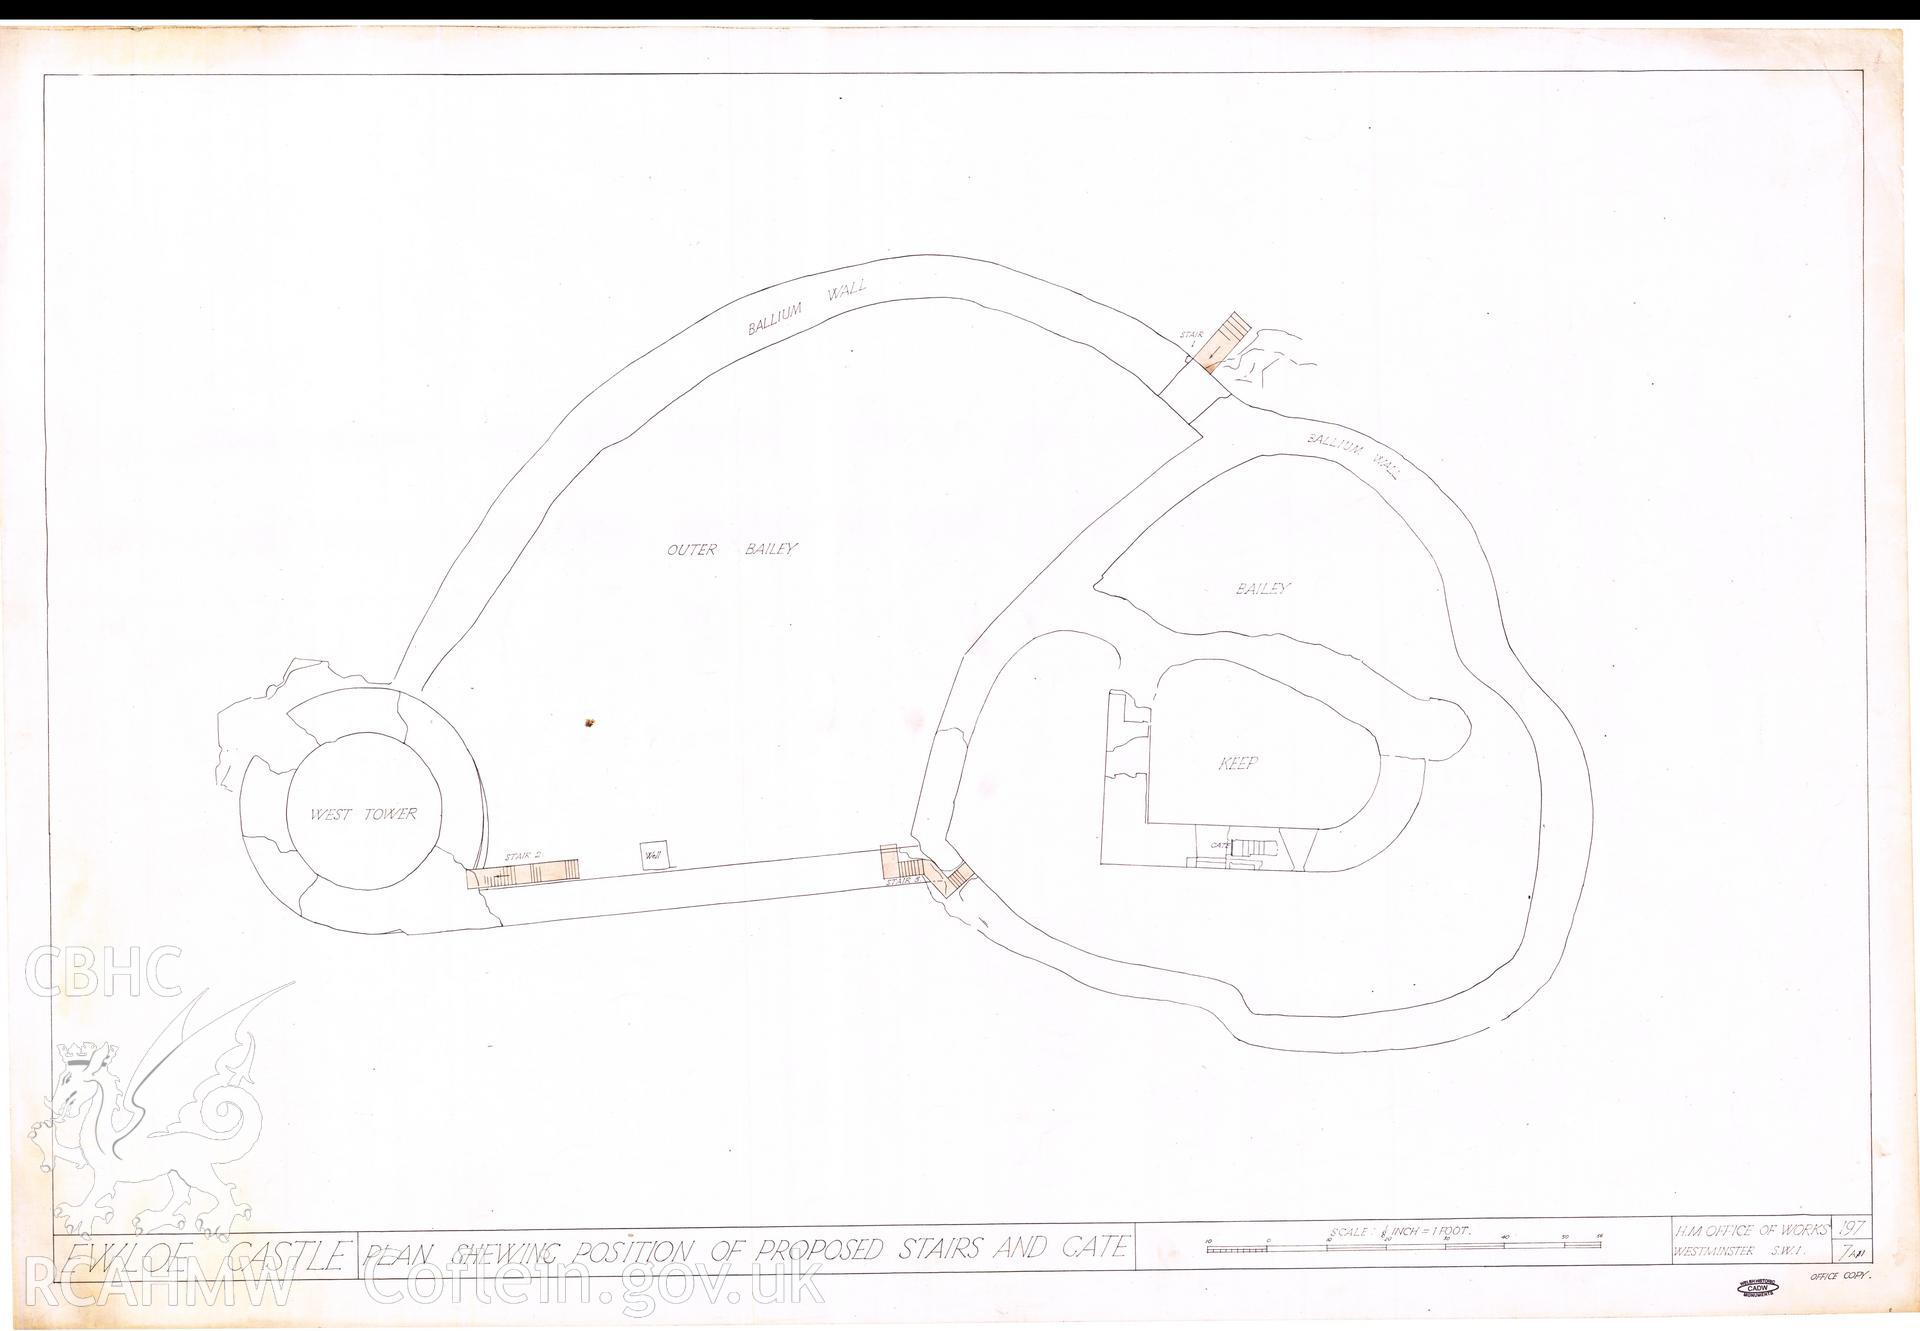 Cadw guardianship monument drawing of Ewloe Castle. Proposed stairs (3) + grille. Cadw Ref. No:197/7A1. Scale 1:96.